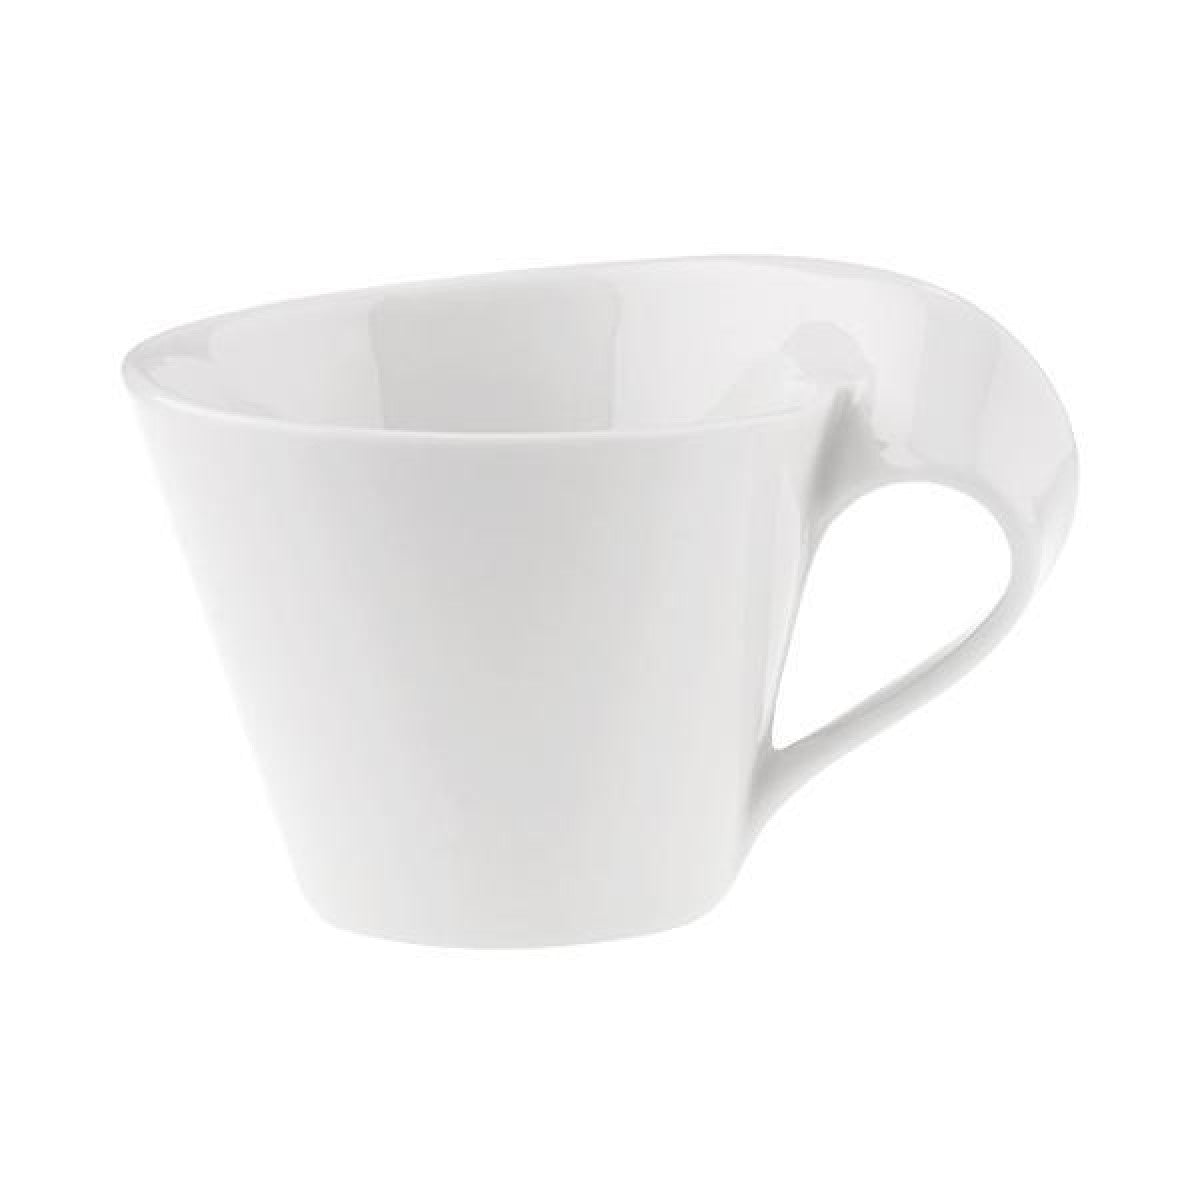 Newwave Caffe Capuccino Cup